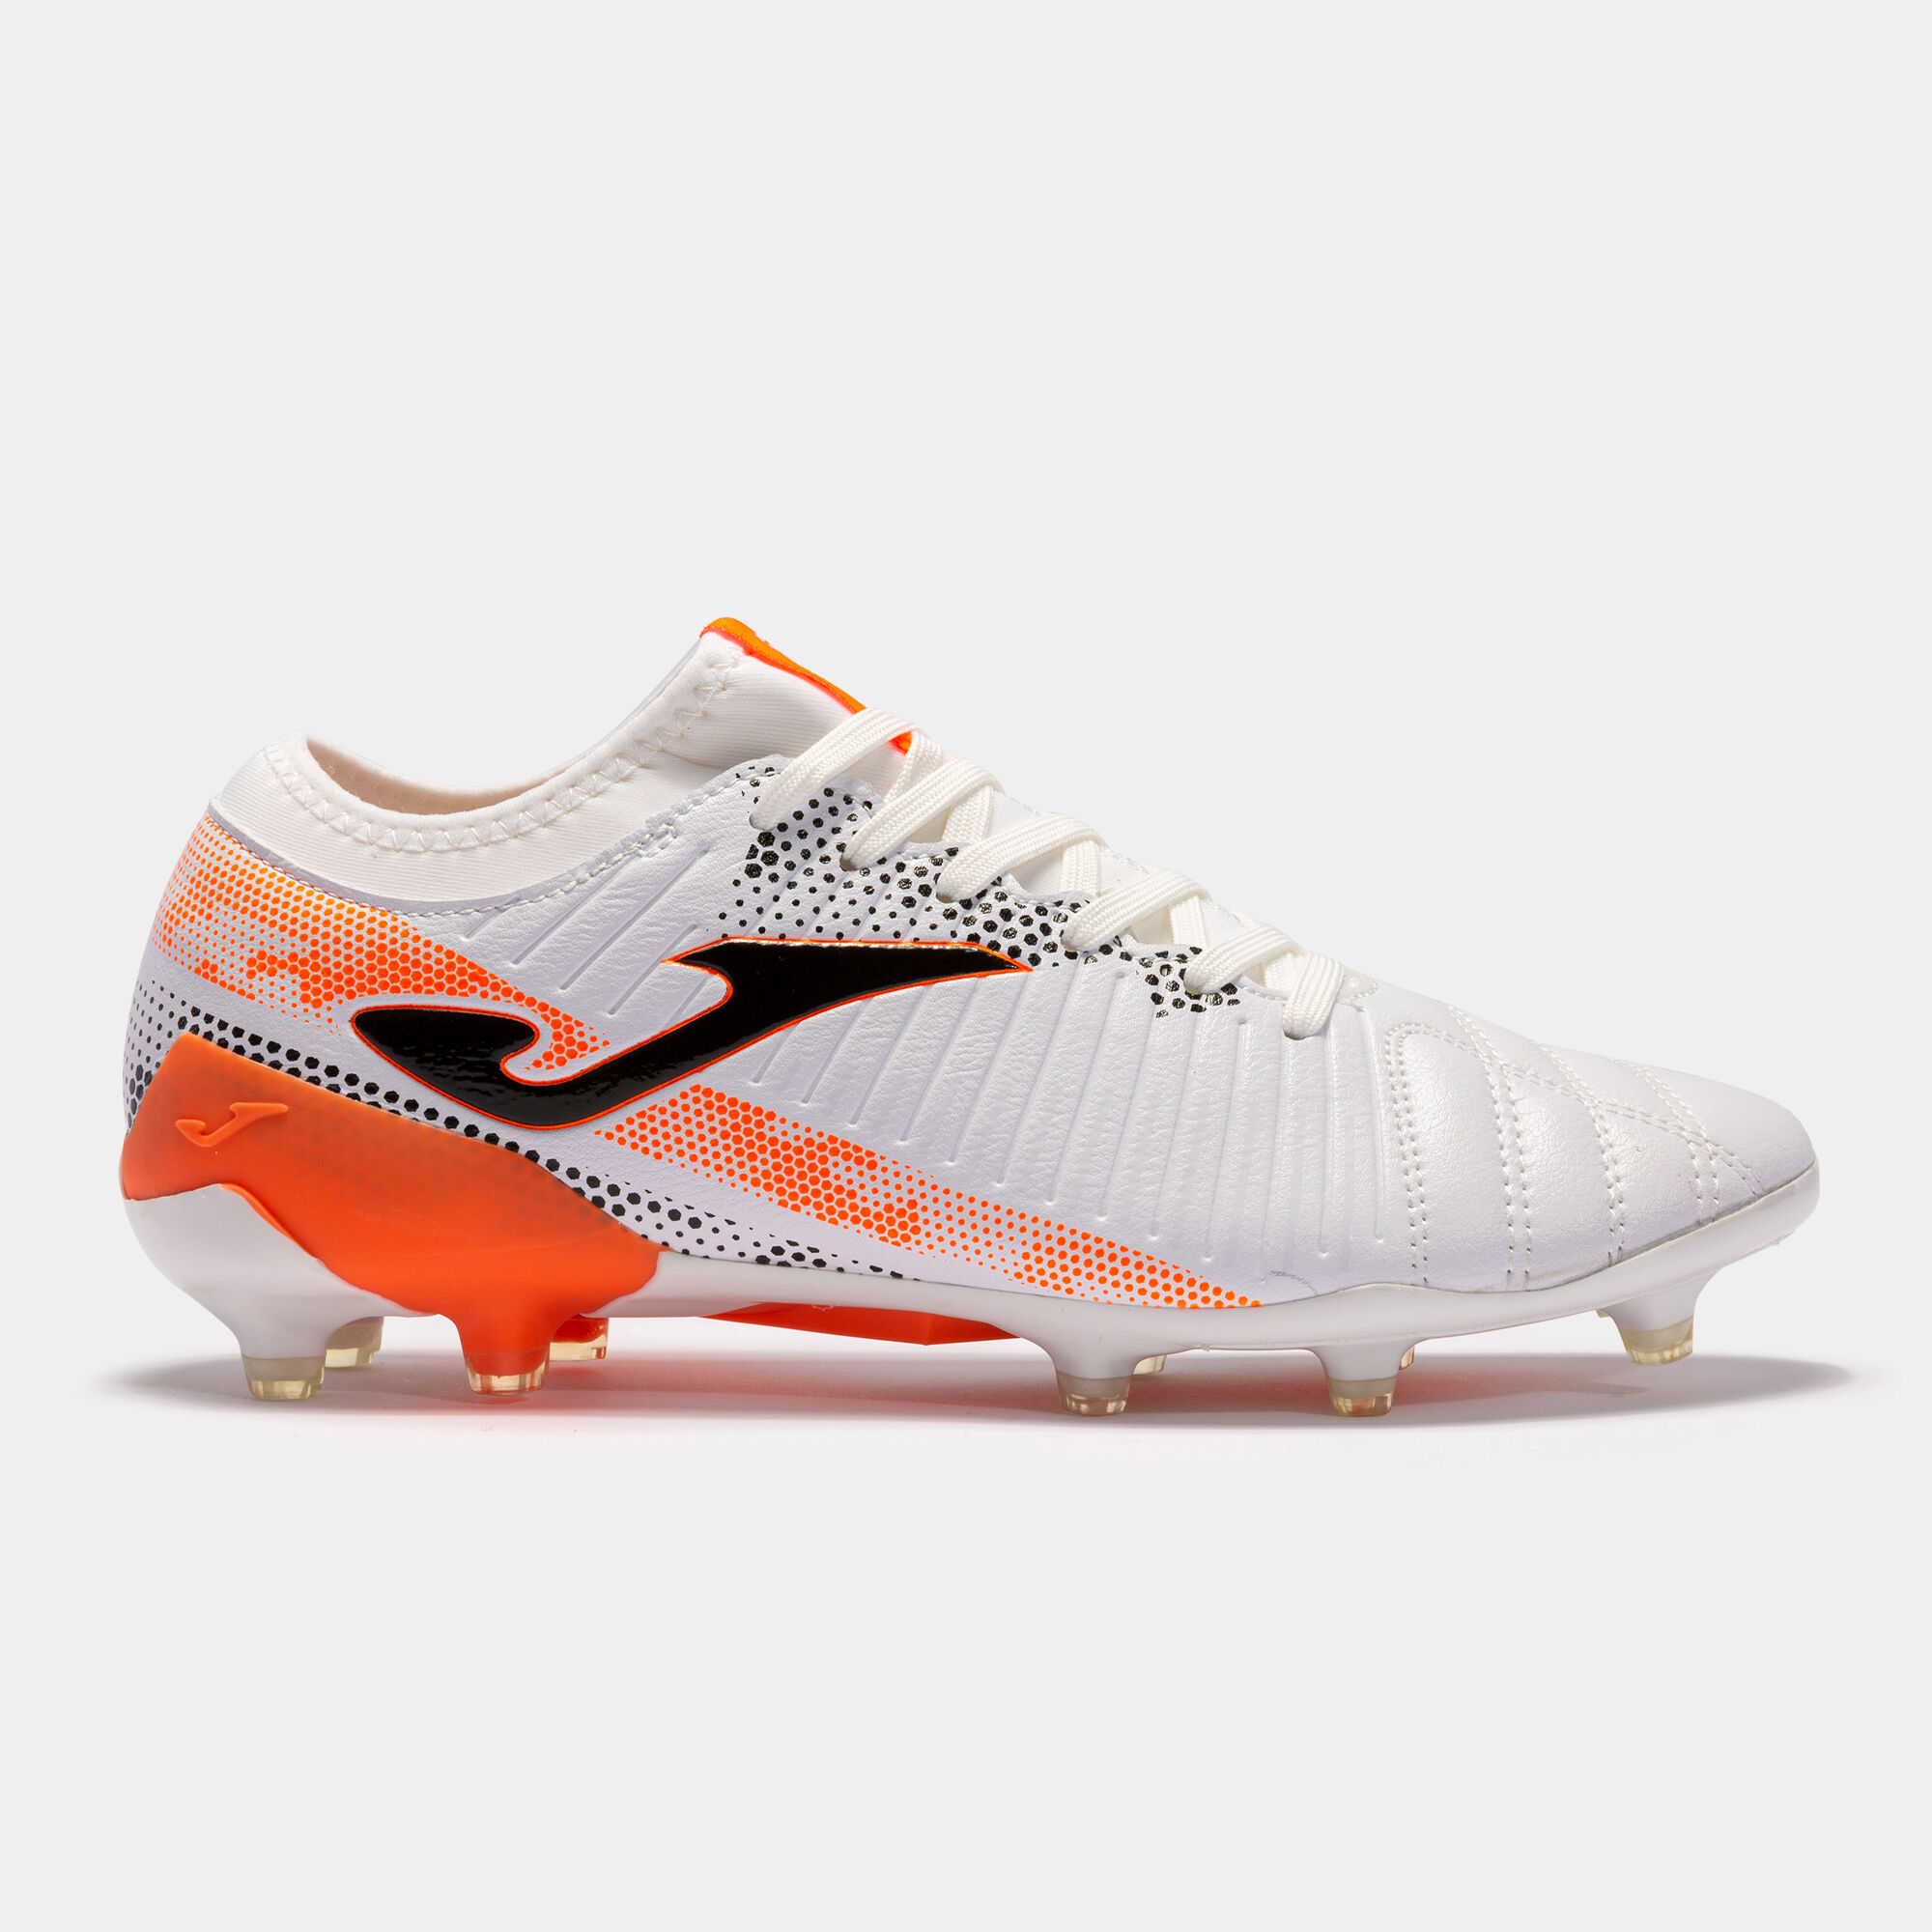 FOOTBALL BOOTS PROPULSION CUP 21 FIRM GROUND FG WHITE ORANGE